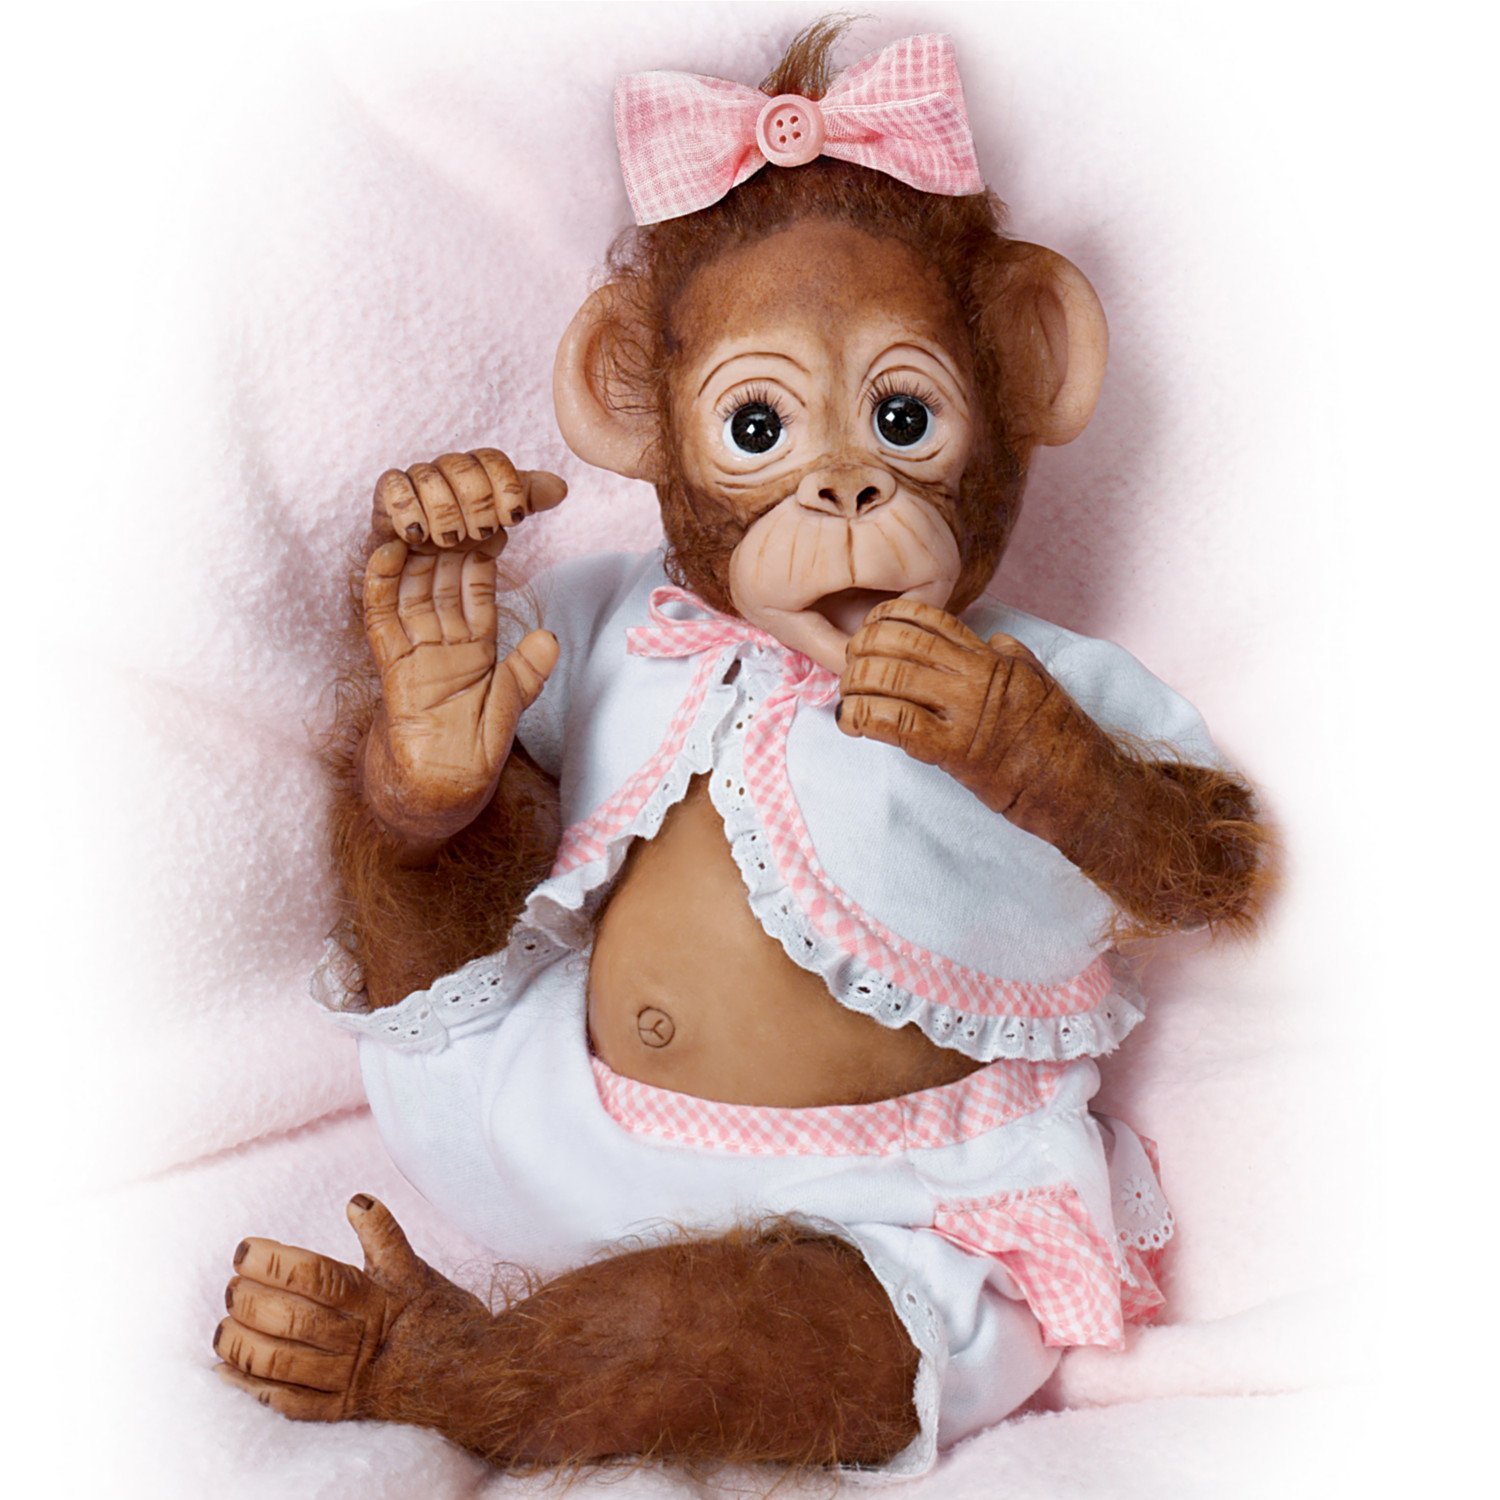 Amazon.com: Cindy Sales' Poseable Baby Monkey Doll: Cute As A Button ...